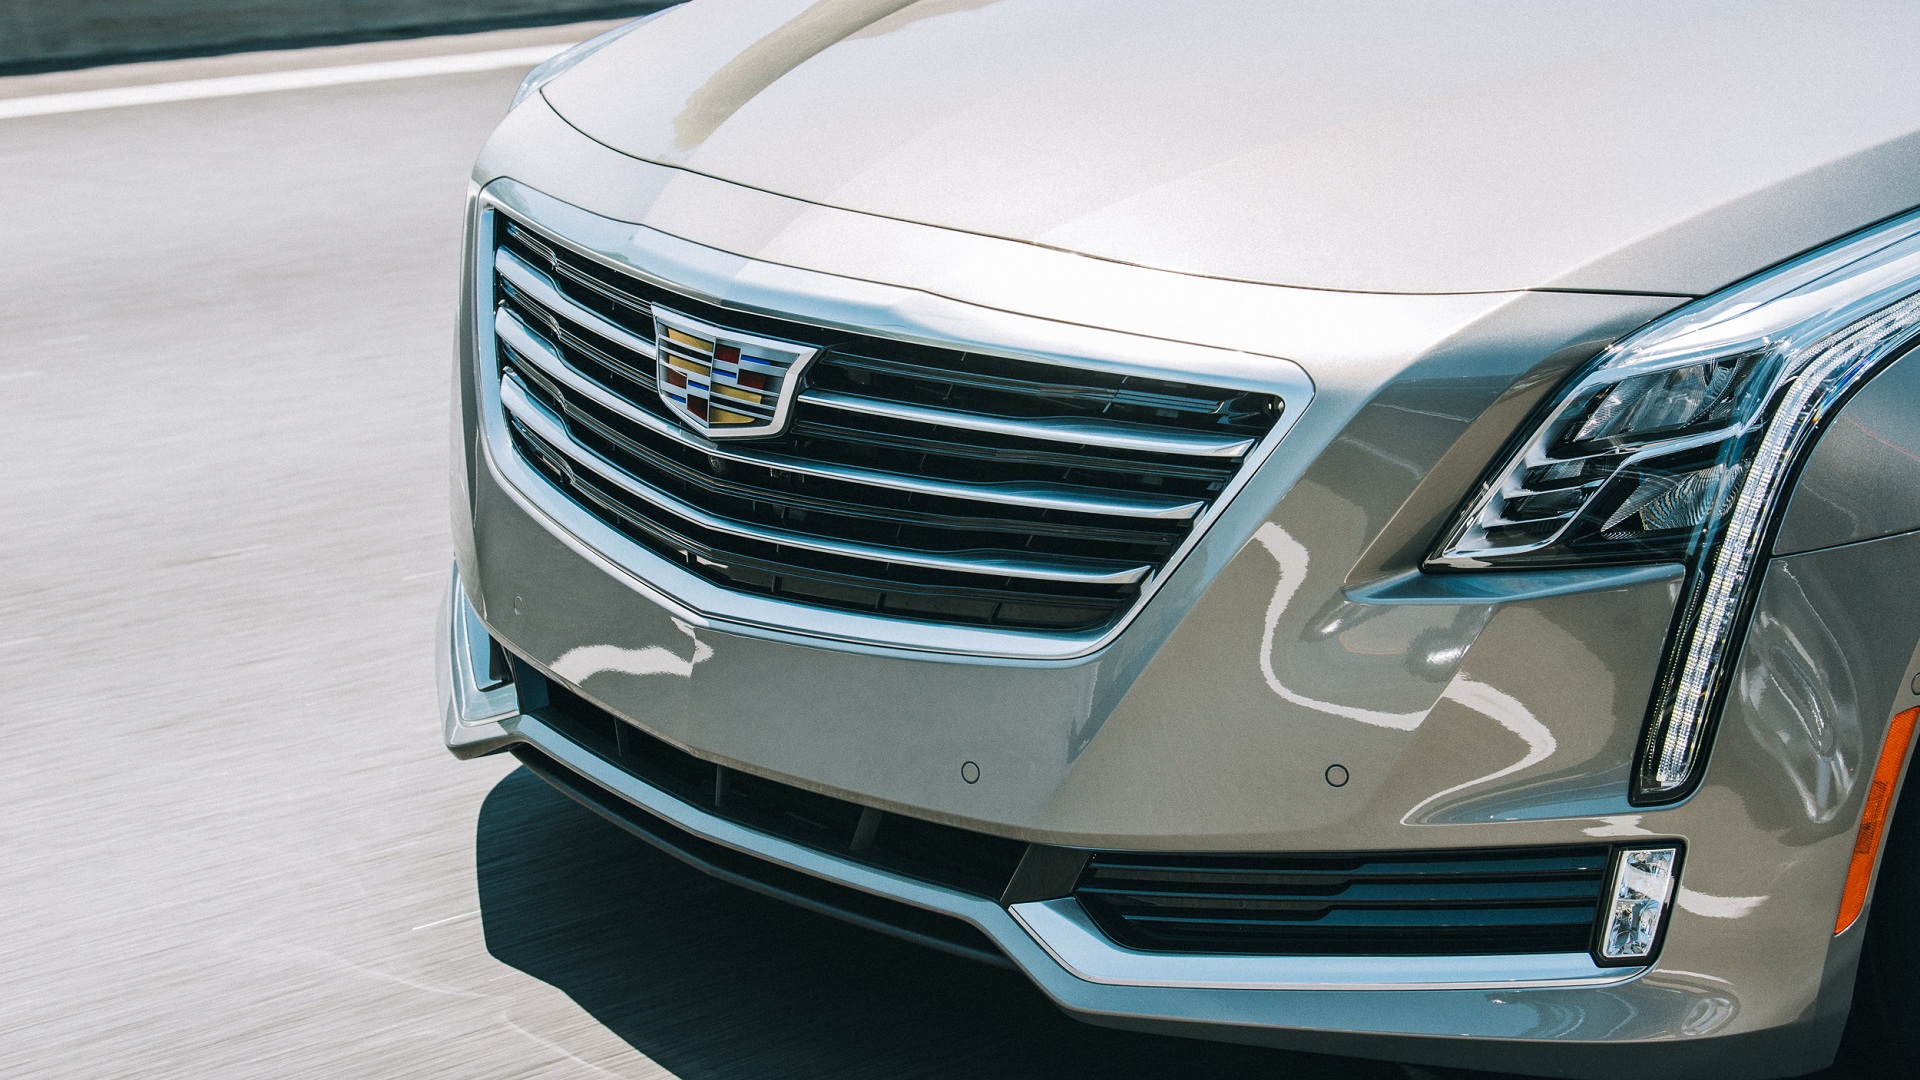 2017 Cadillac CT6 plug-in hybrid, New York City and Westchester County, NY, May 2017